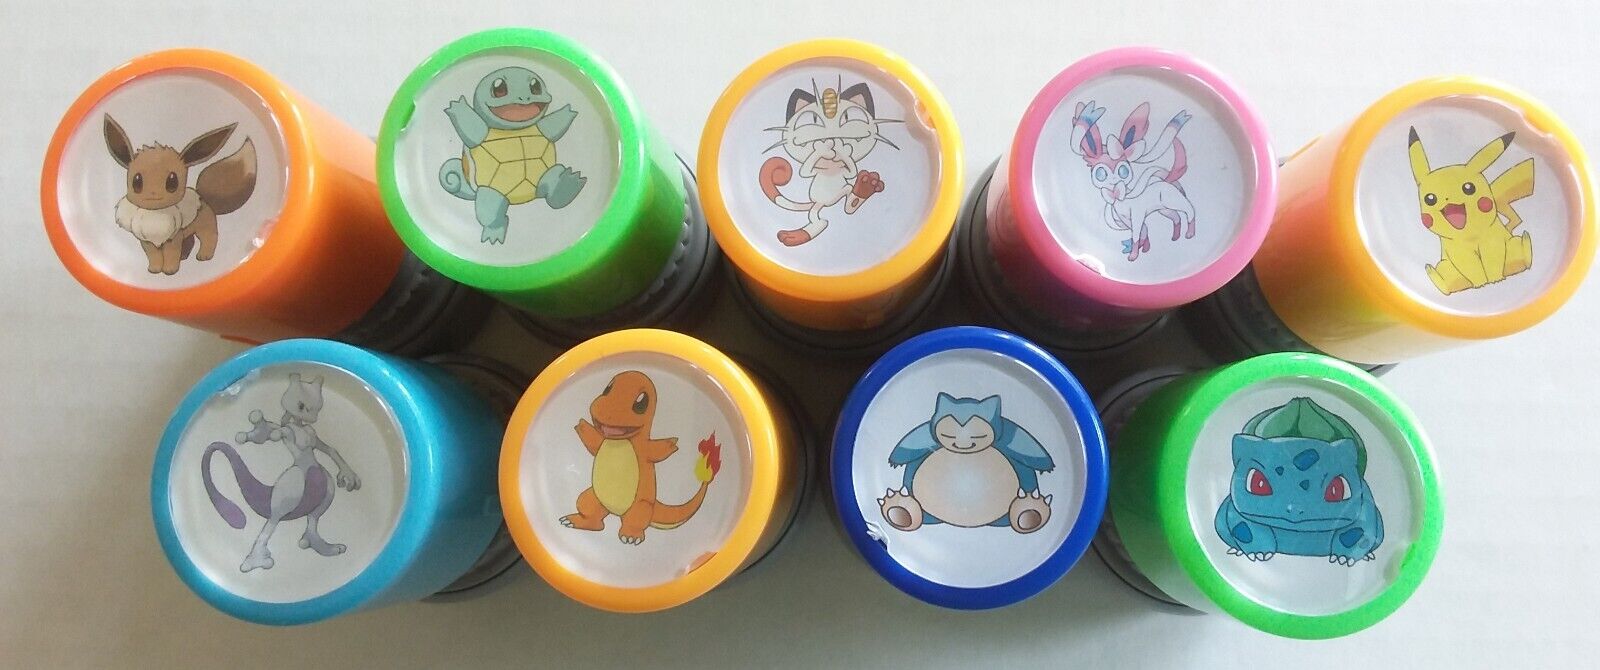 Pokemon ink stamps set of 9 Eevee Sylveon Snorlax Mewtwo Meowth self ink red 2cm